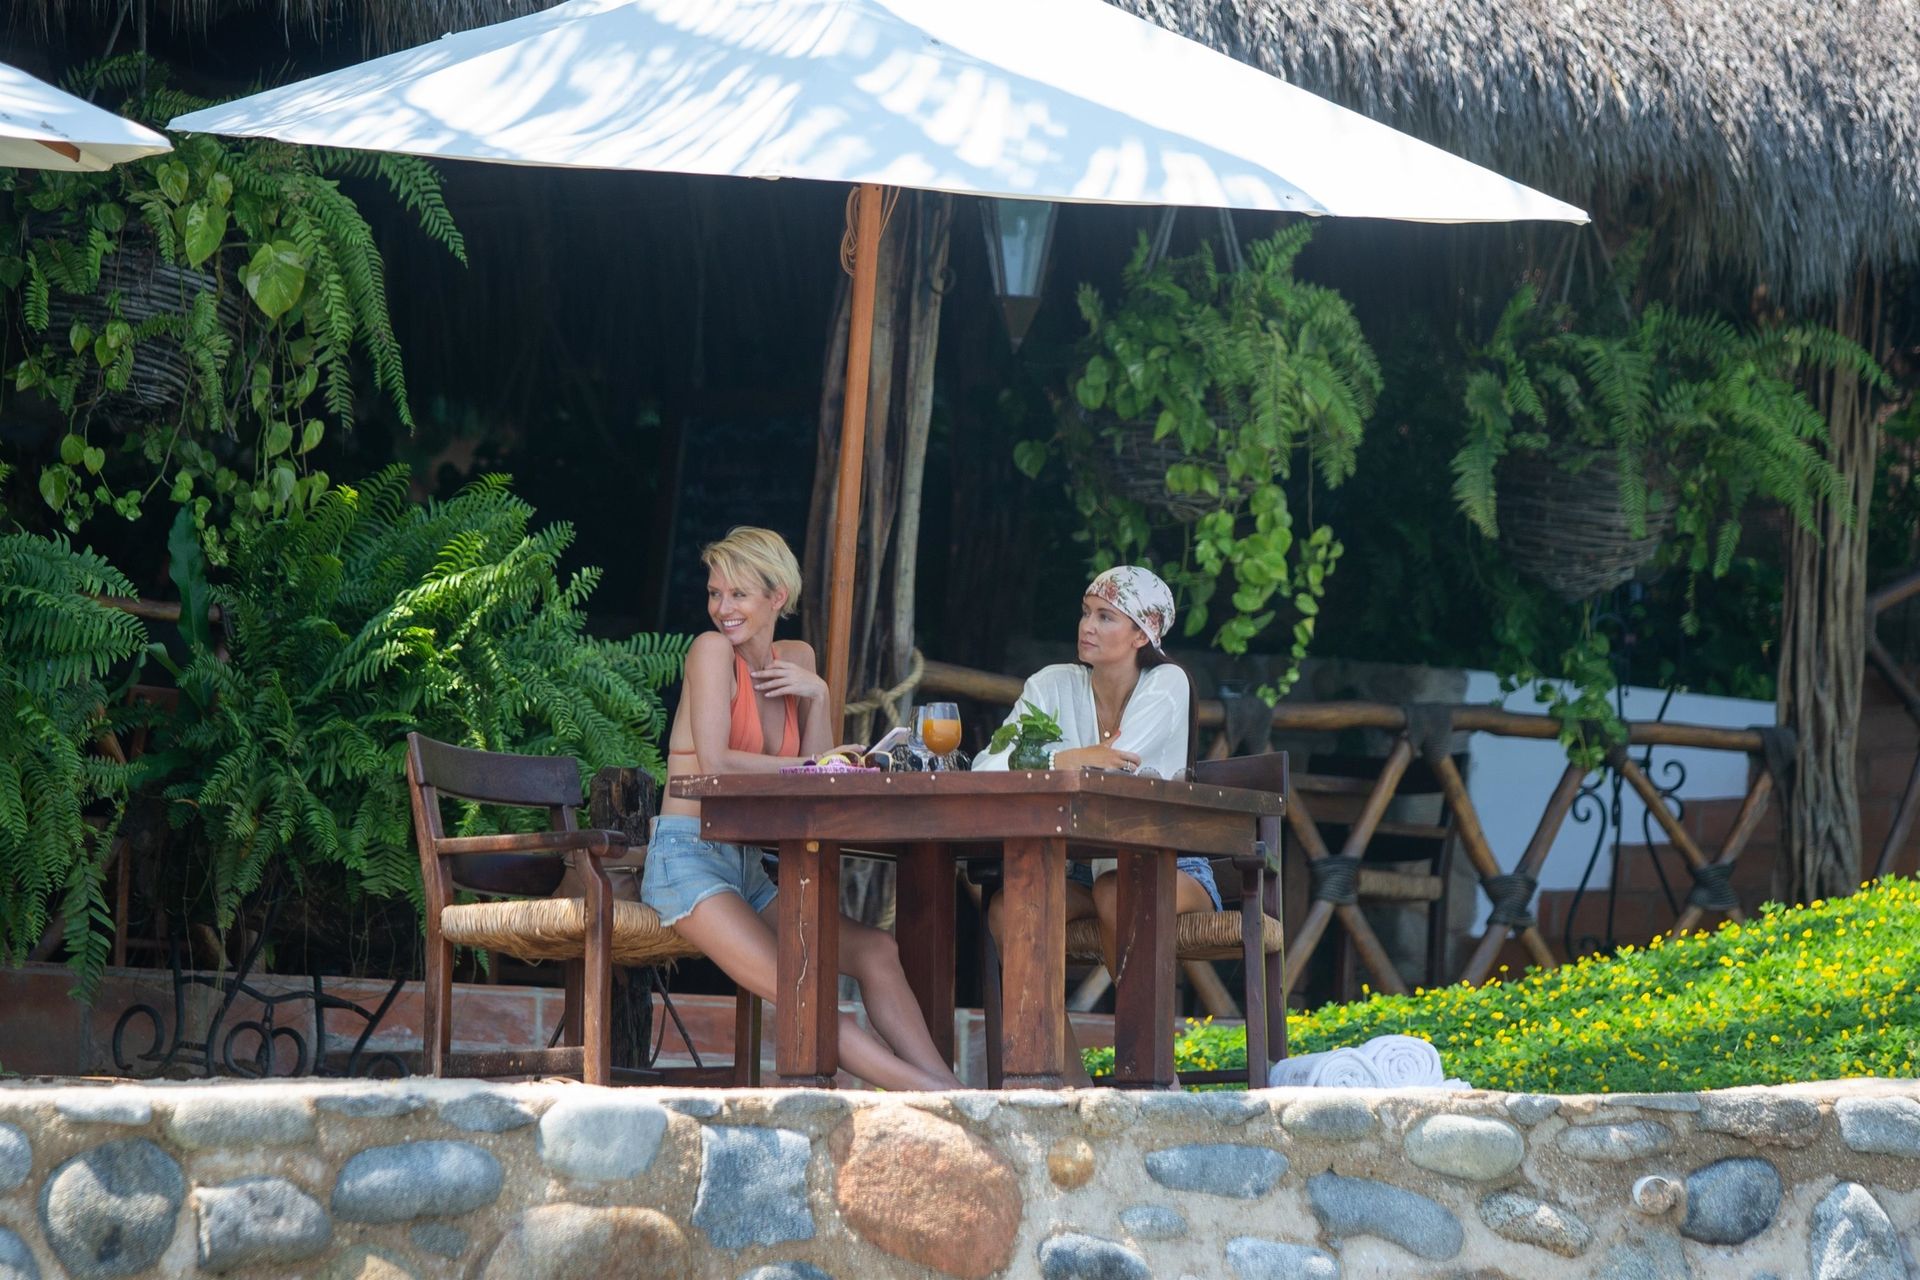 Nicky Whelan & Kate Neilson Vacation Together in Mexico (17 Photos)